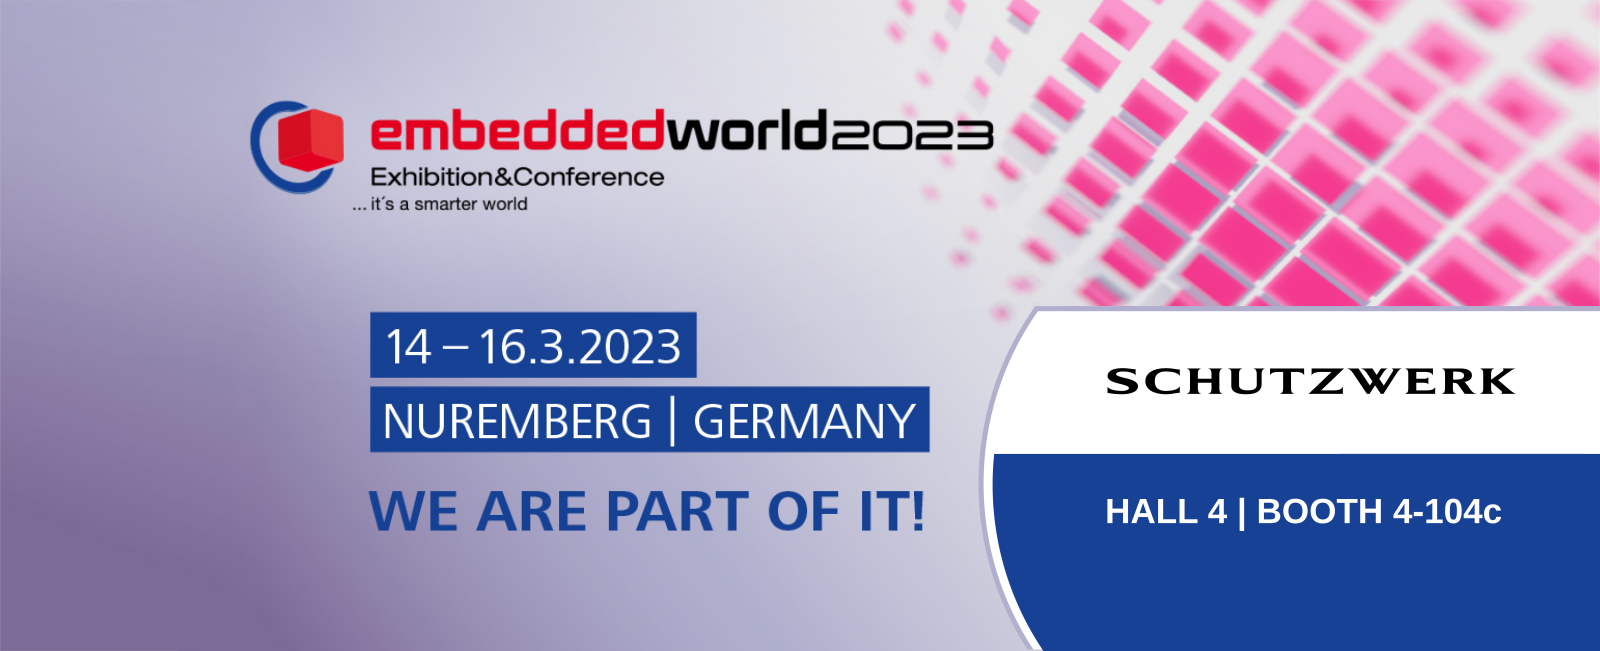 preview-image for embedded world Exhibition&Conference